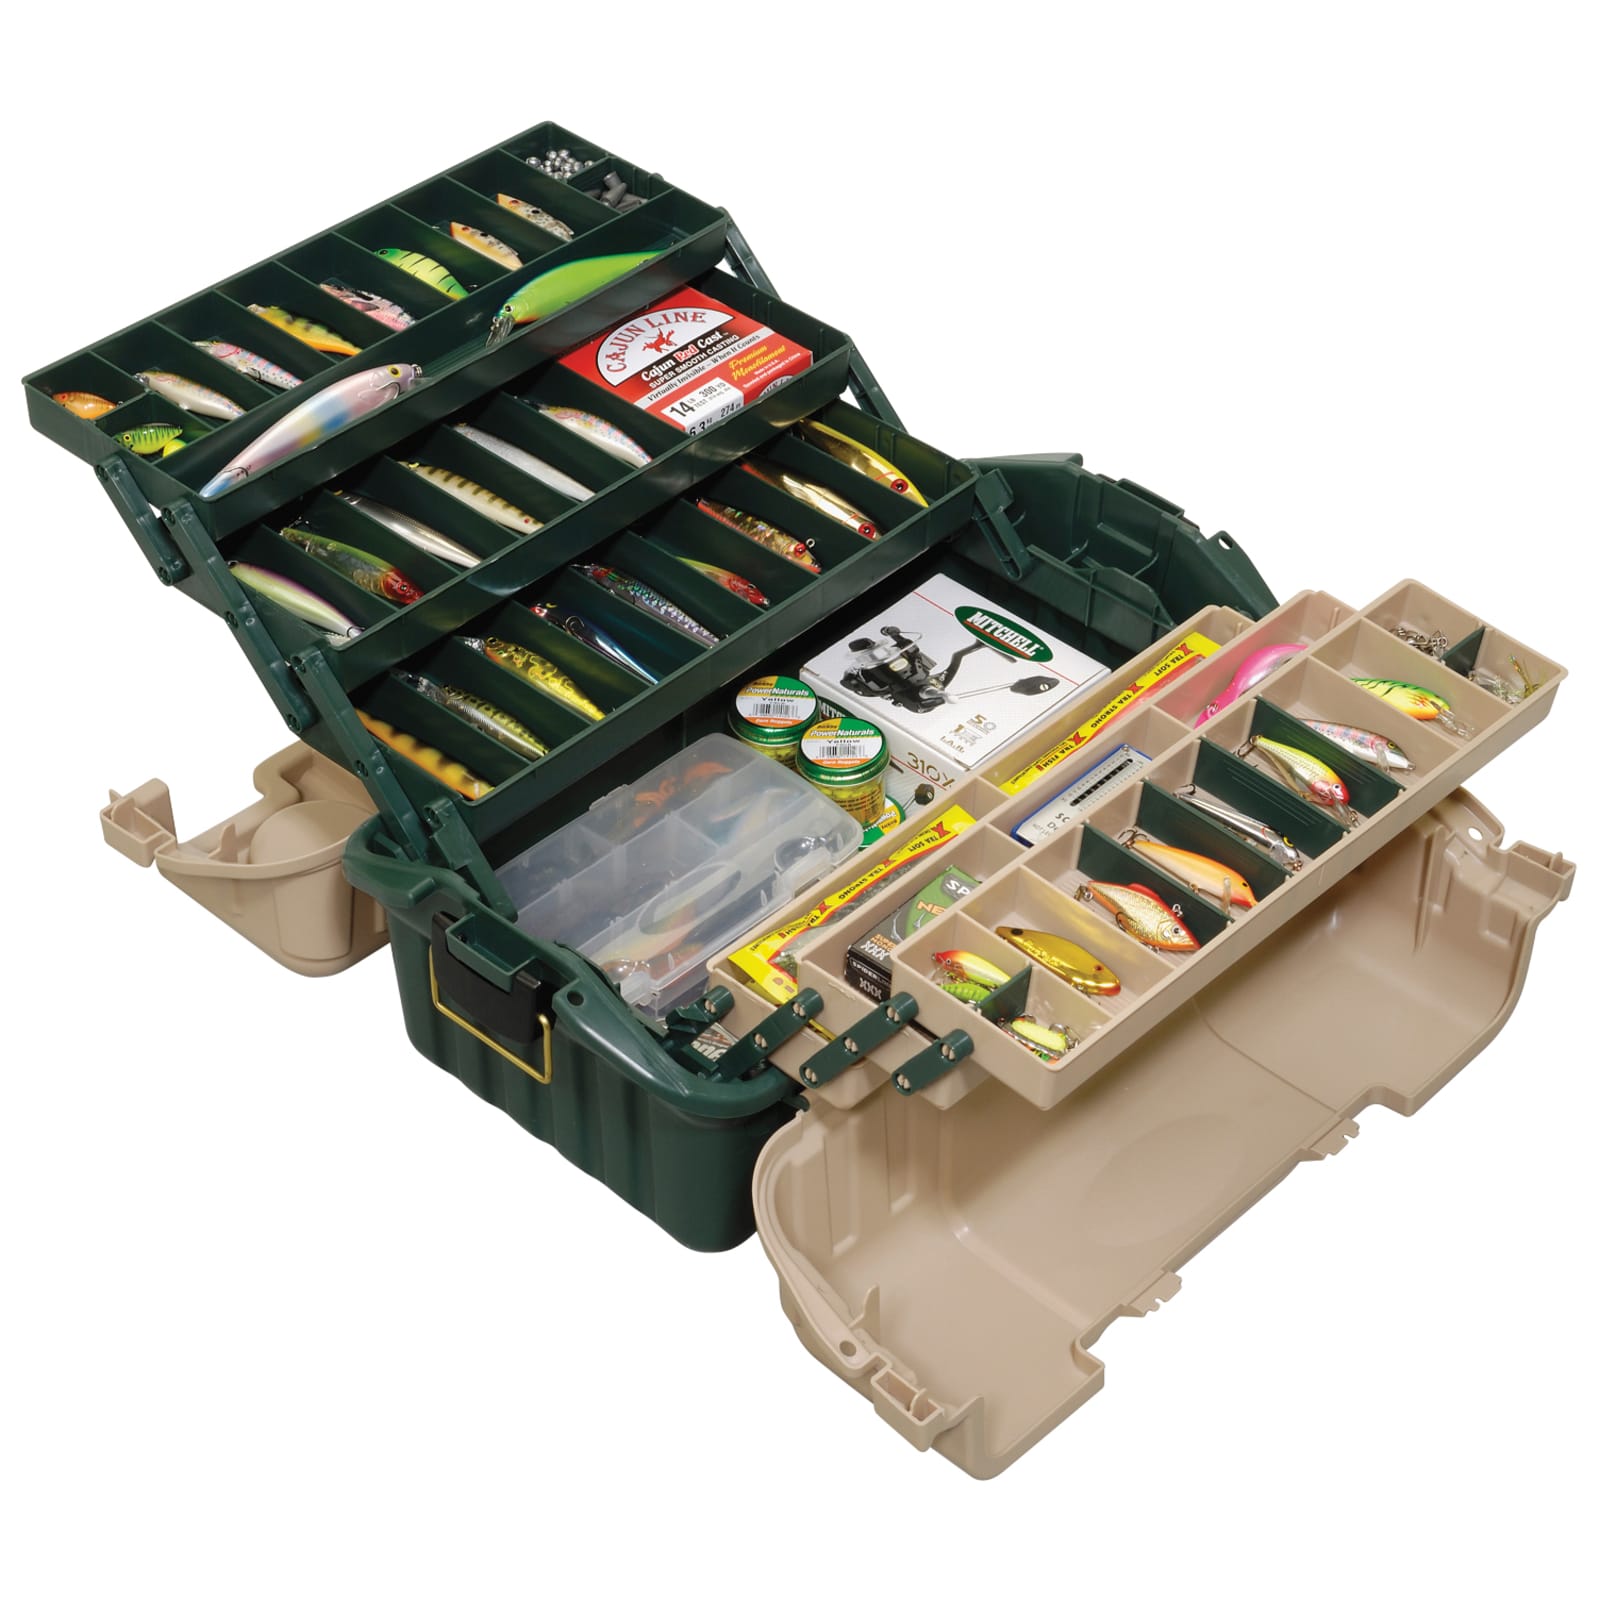 Magnum Green/Sandstone Hip Roof 6-Tray Tackle Box by Plano at